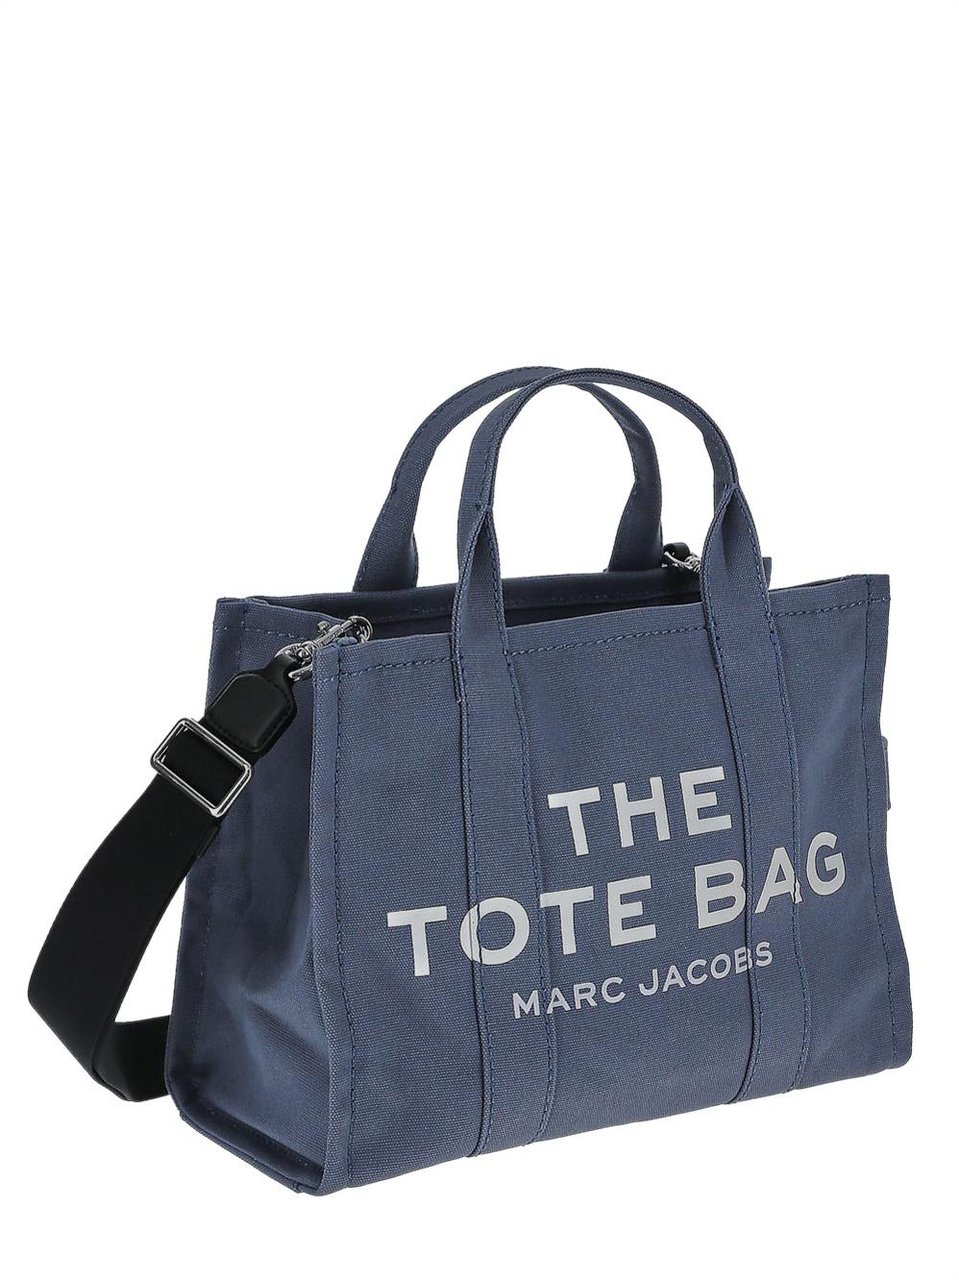 Marc Jacobs Tote Bag Blauw